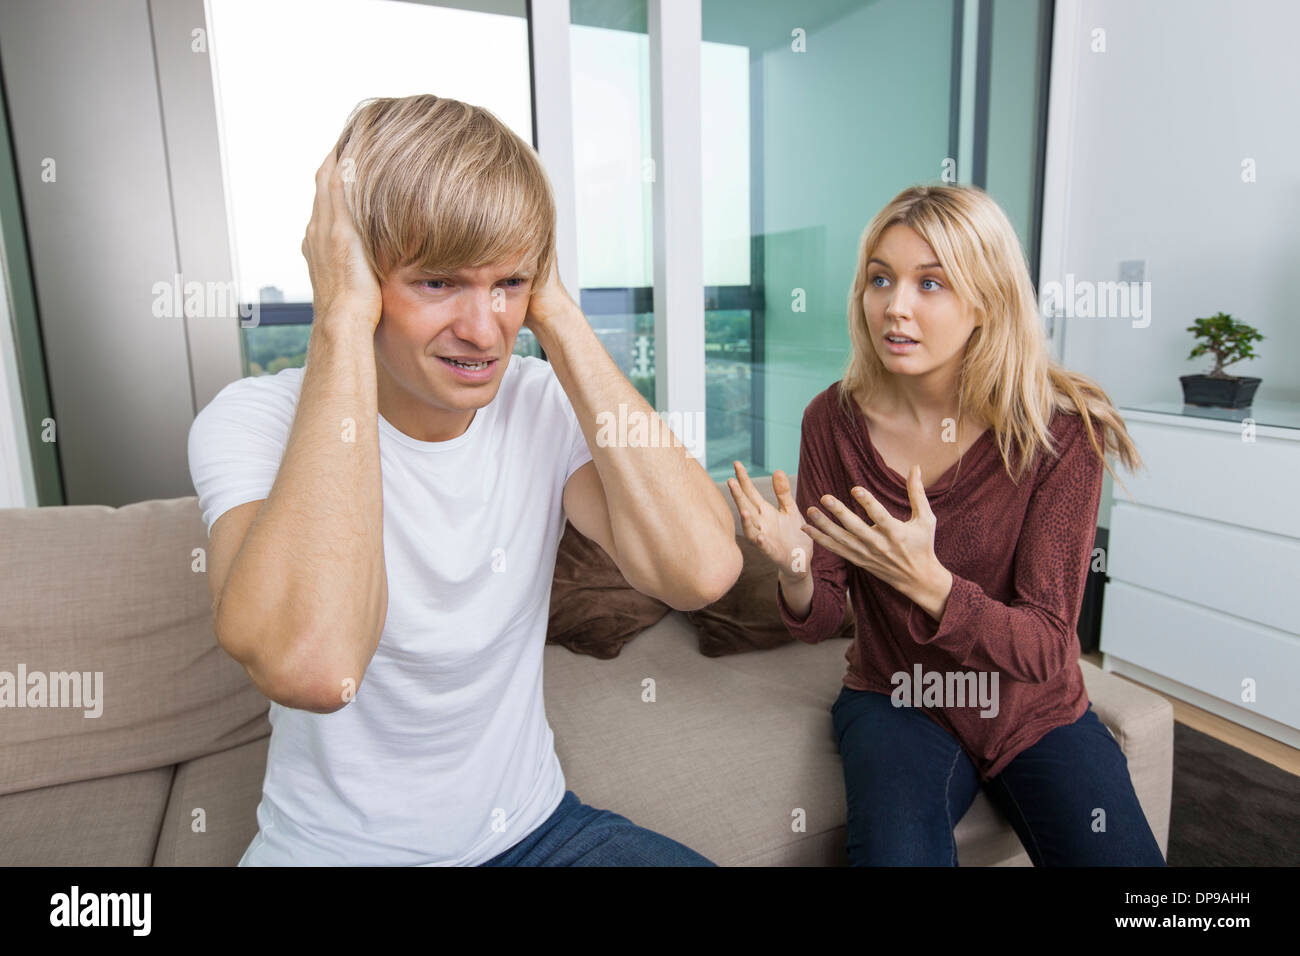 Woman trying to talk as man yells out aloud in living room at home Stock Photo